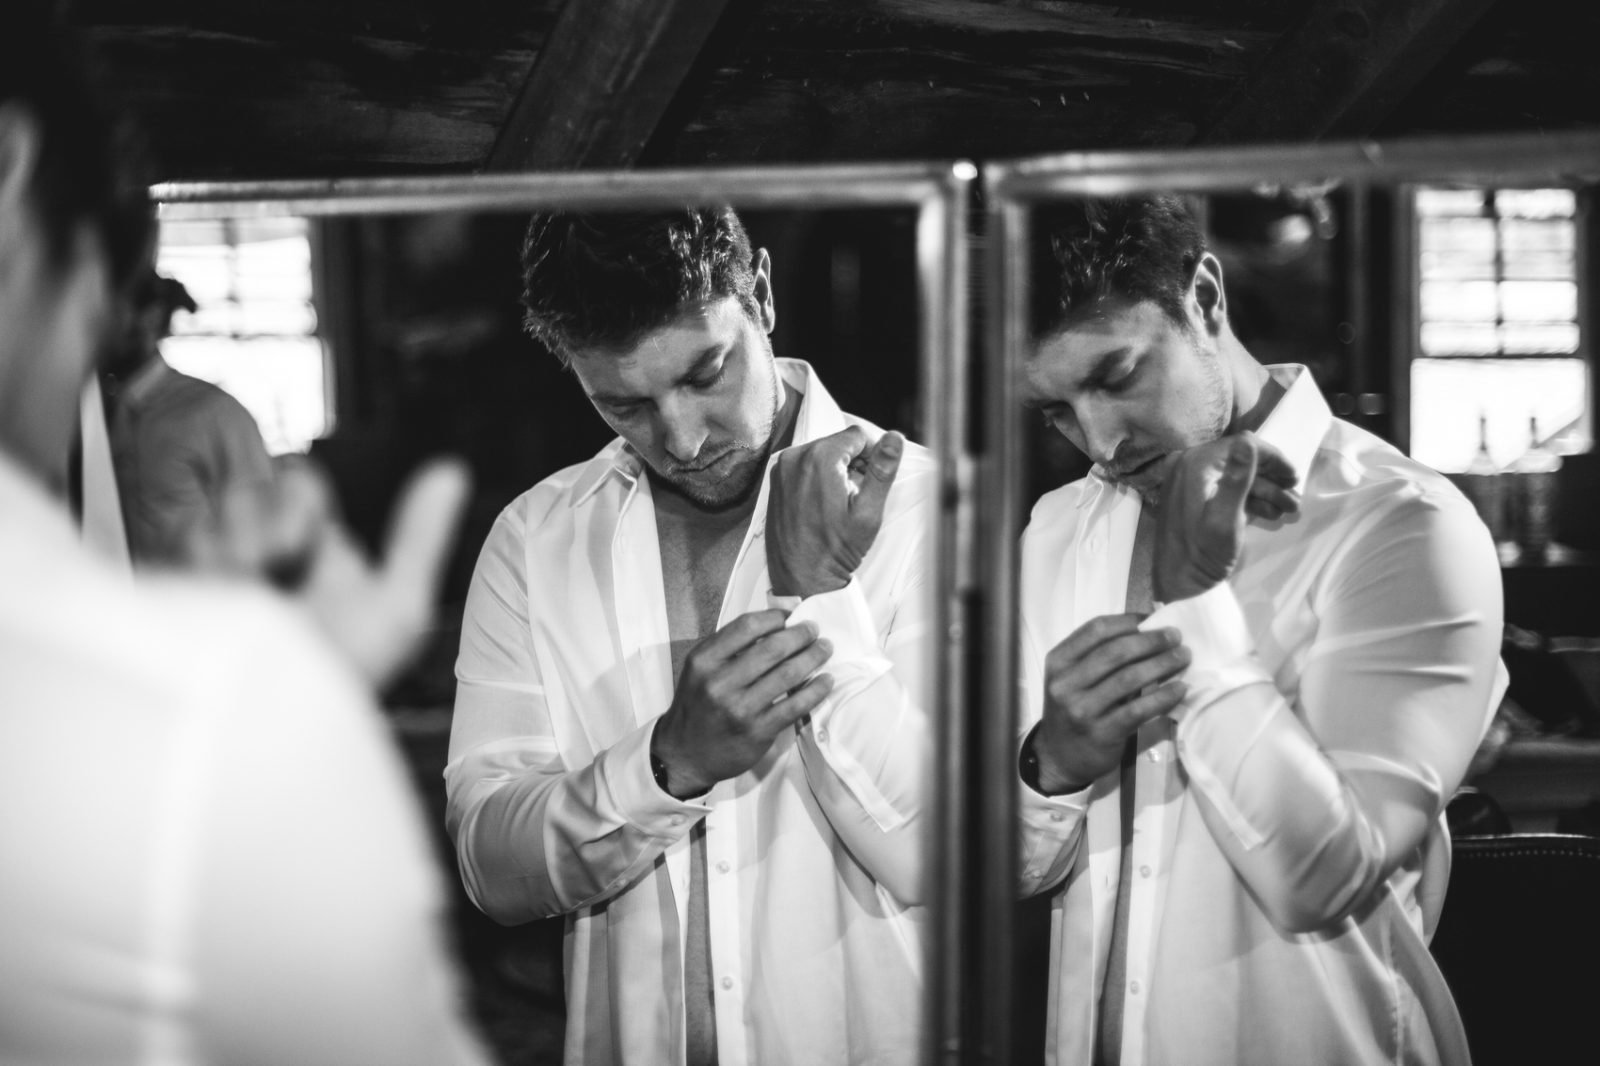 groom getting ready for wedding buttoning up shirt in black and white